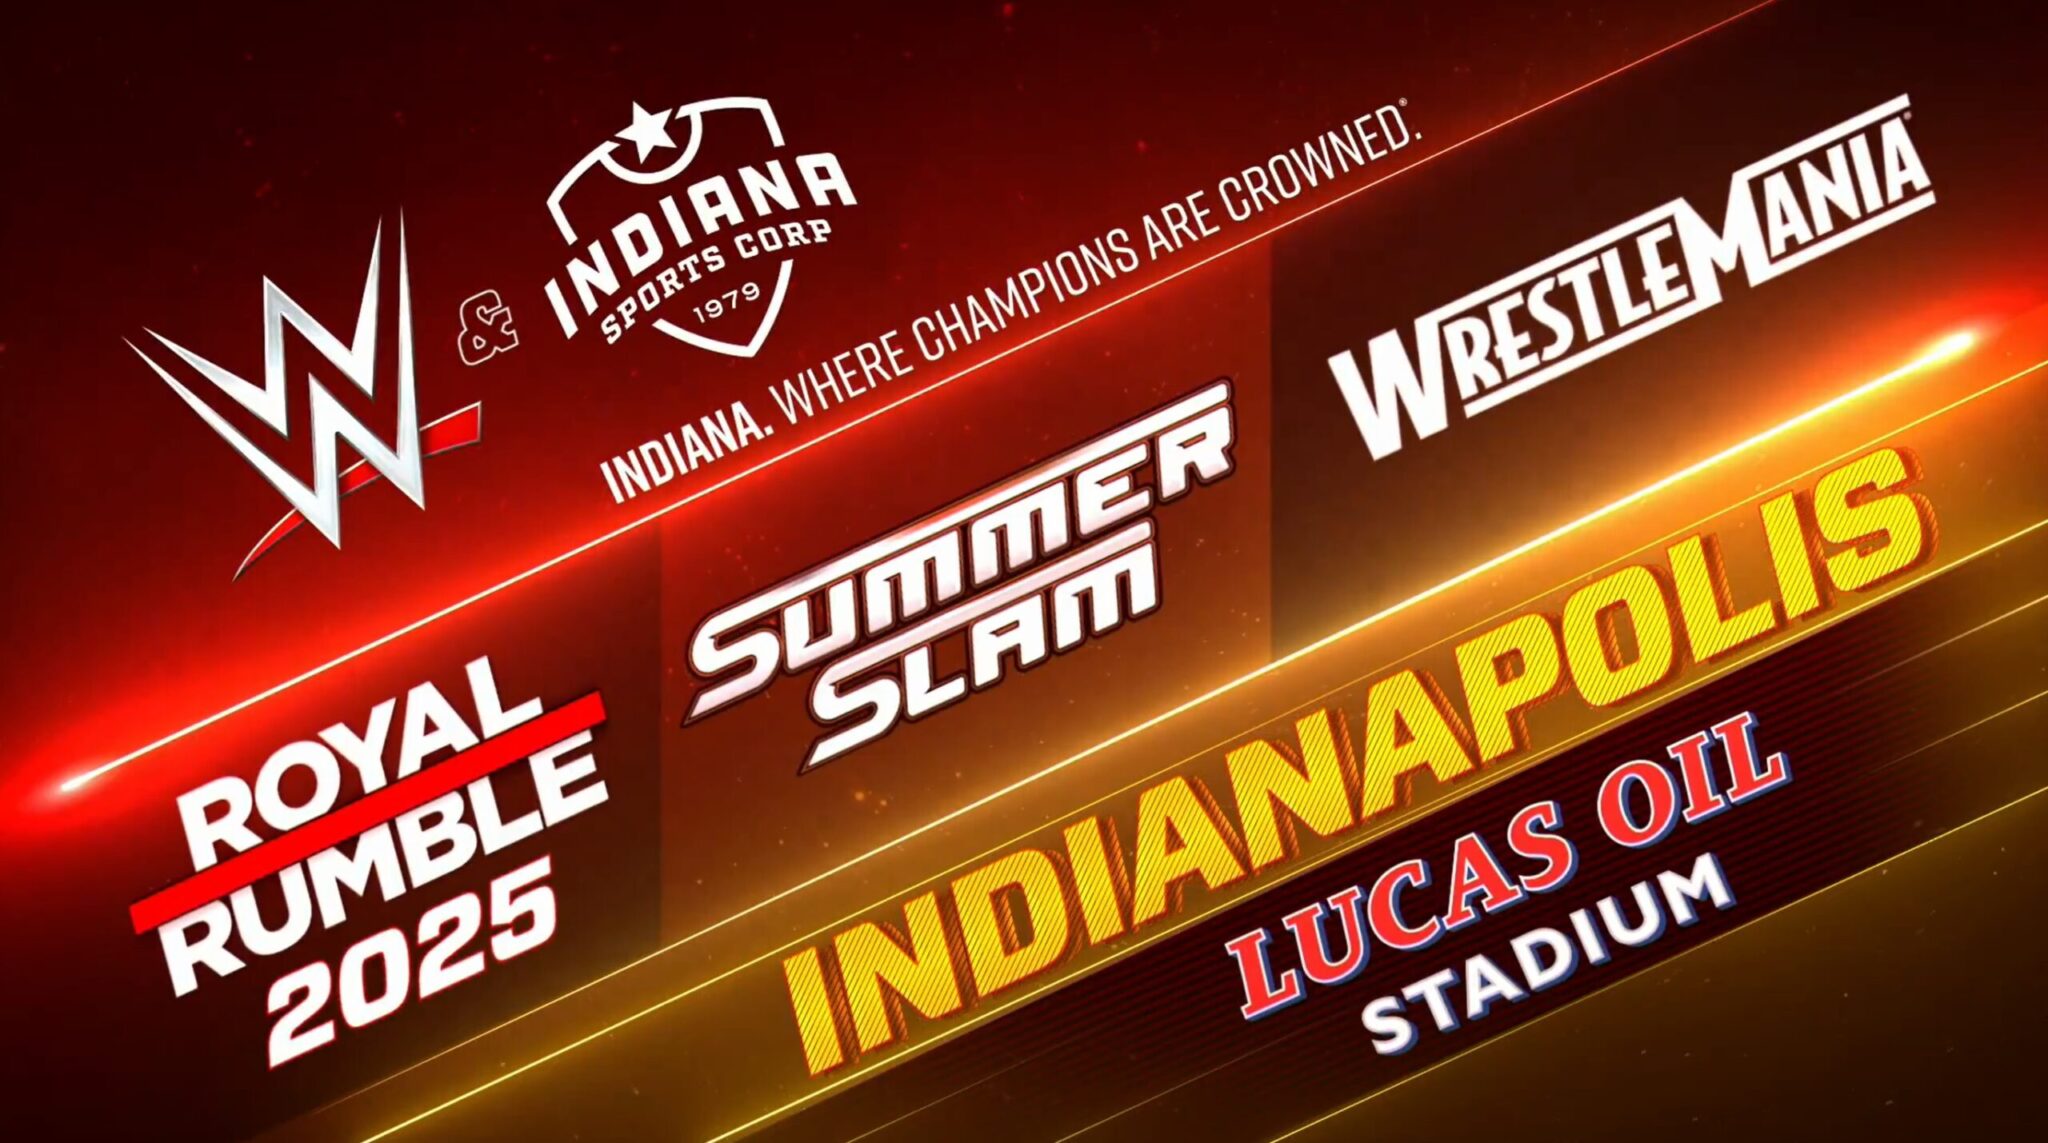 Information Regarding Agreements on WrestleMania, Royal Rumble, and Summerslam in Indianapolis.